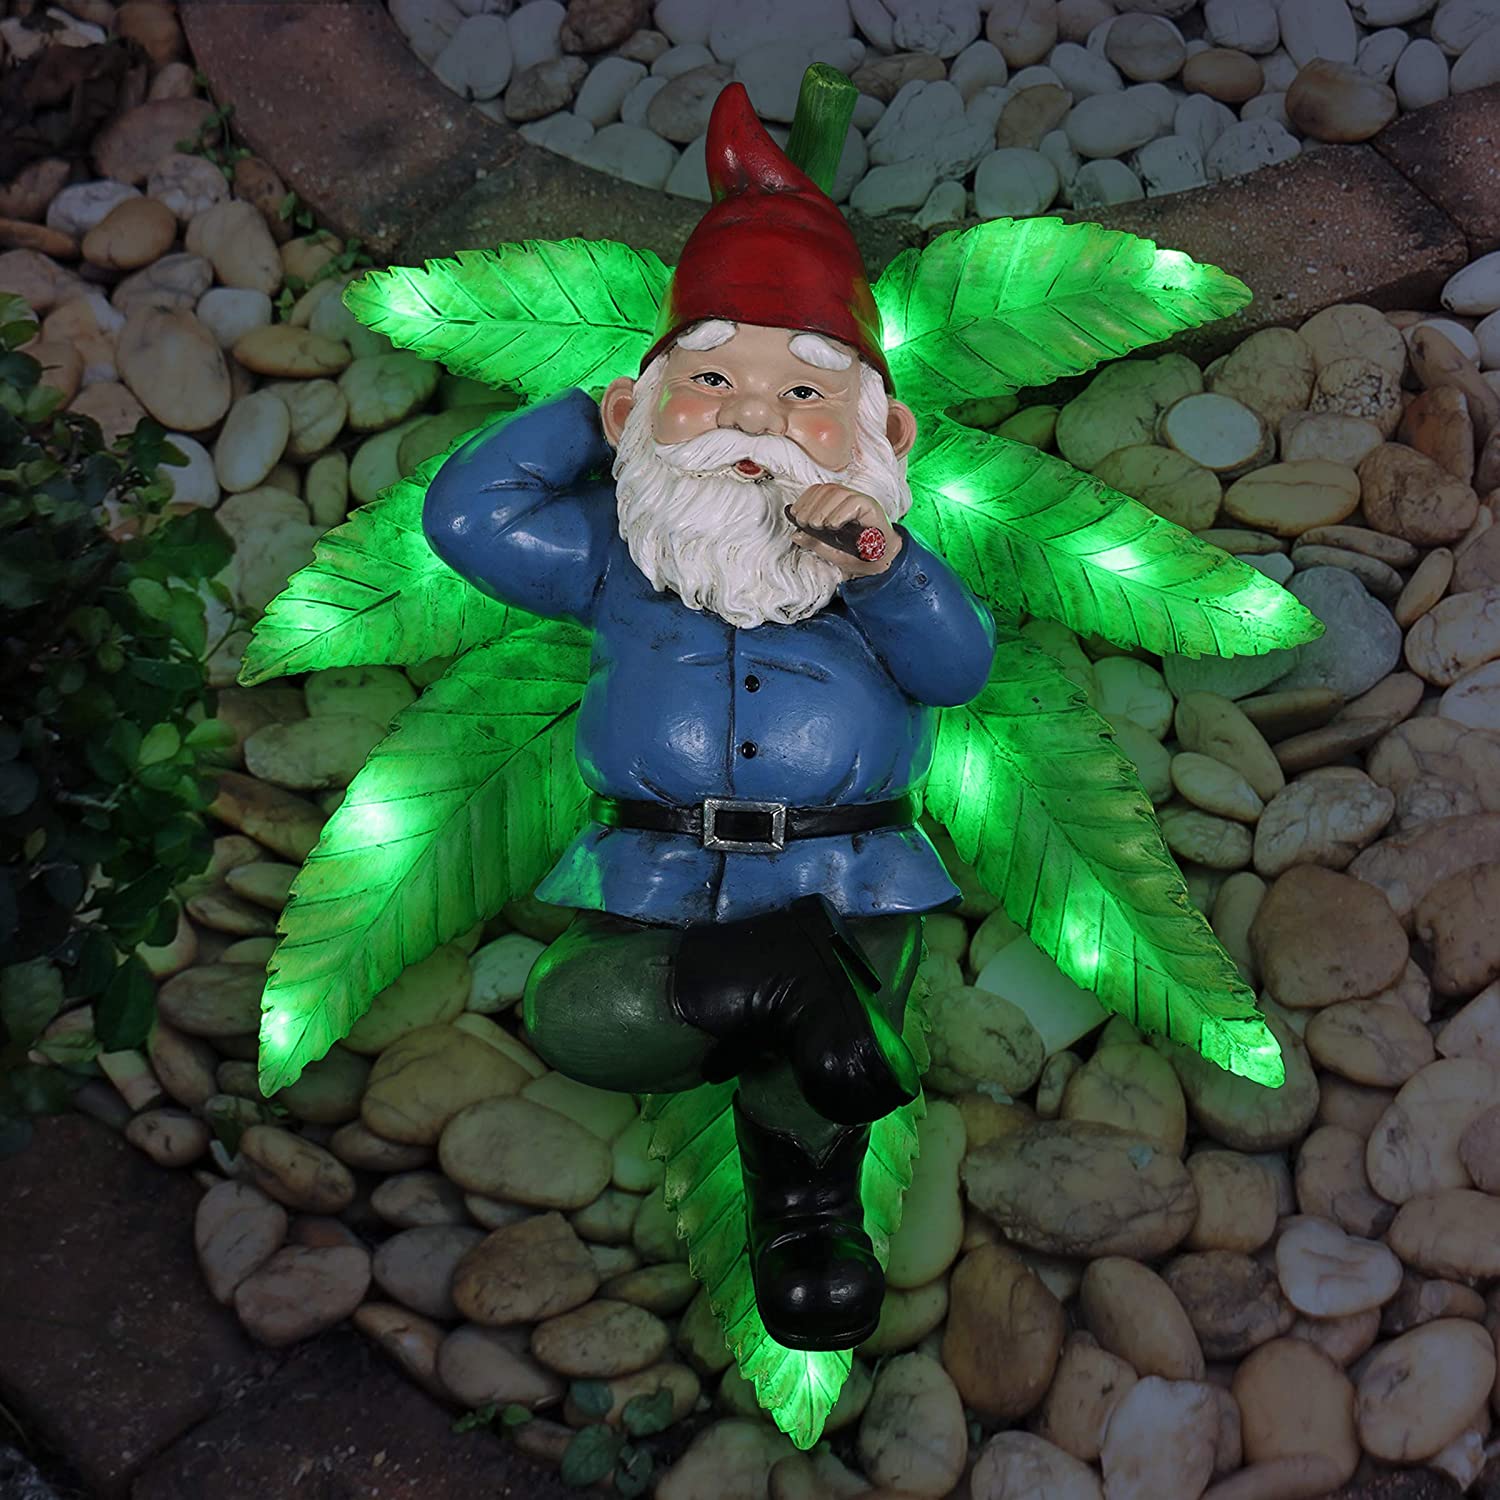 Stoner Garden Gnomes Buying Guide to Save You Money and Time